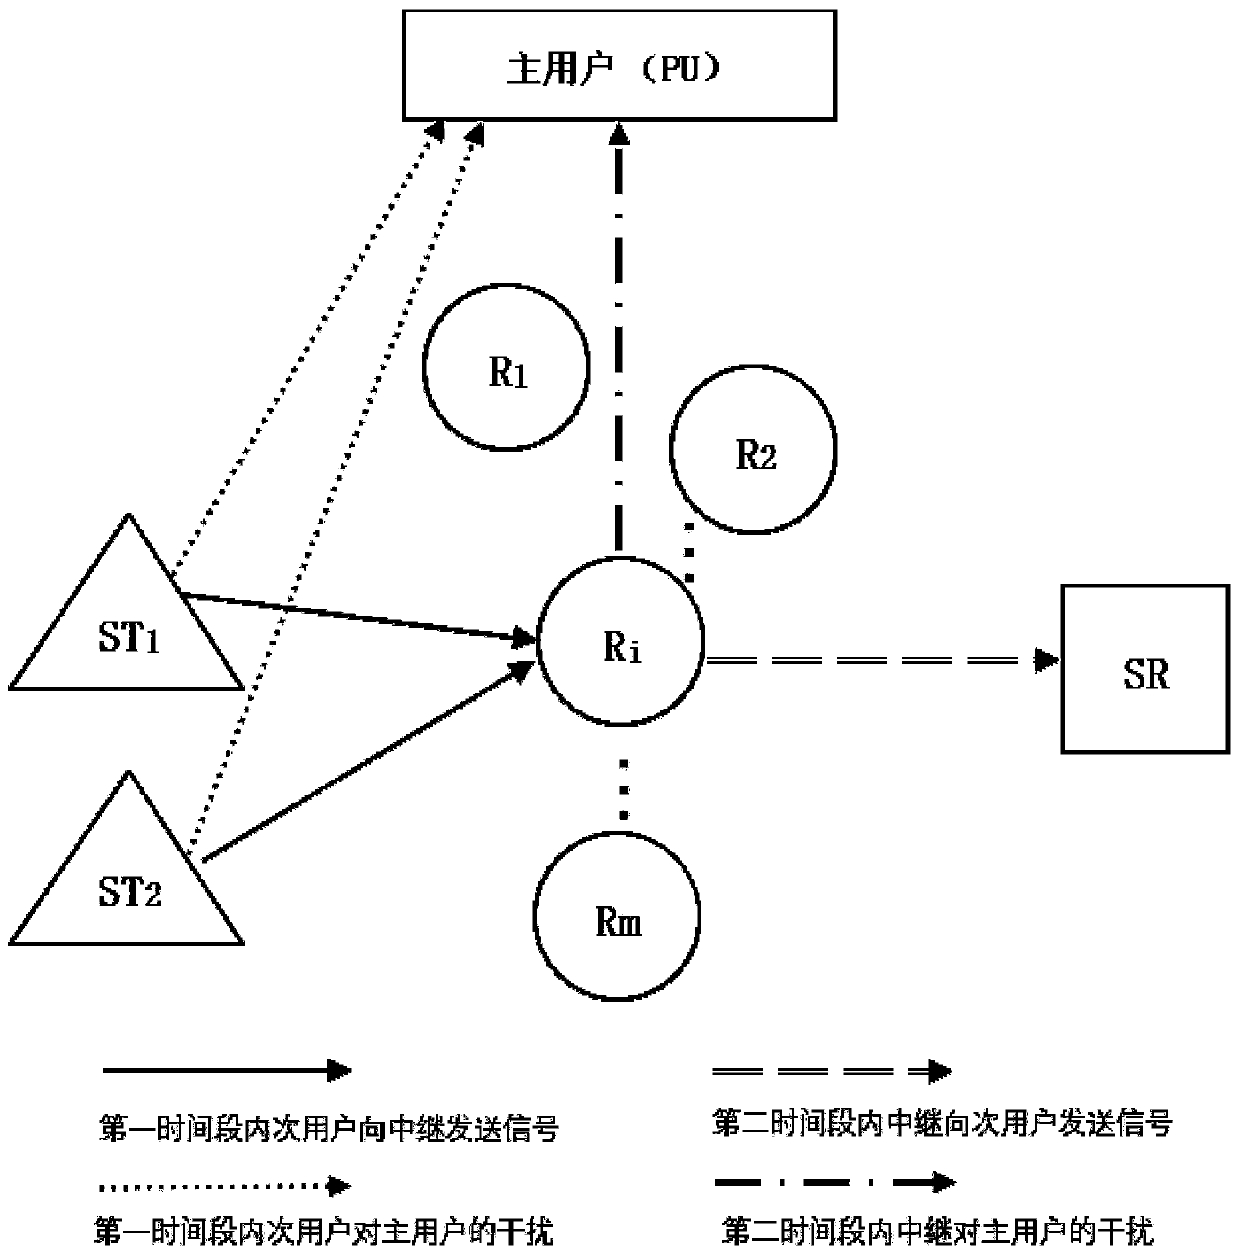 Multi-user resource allocation method based on NOMA and SWIPT cognitive radio environment